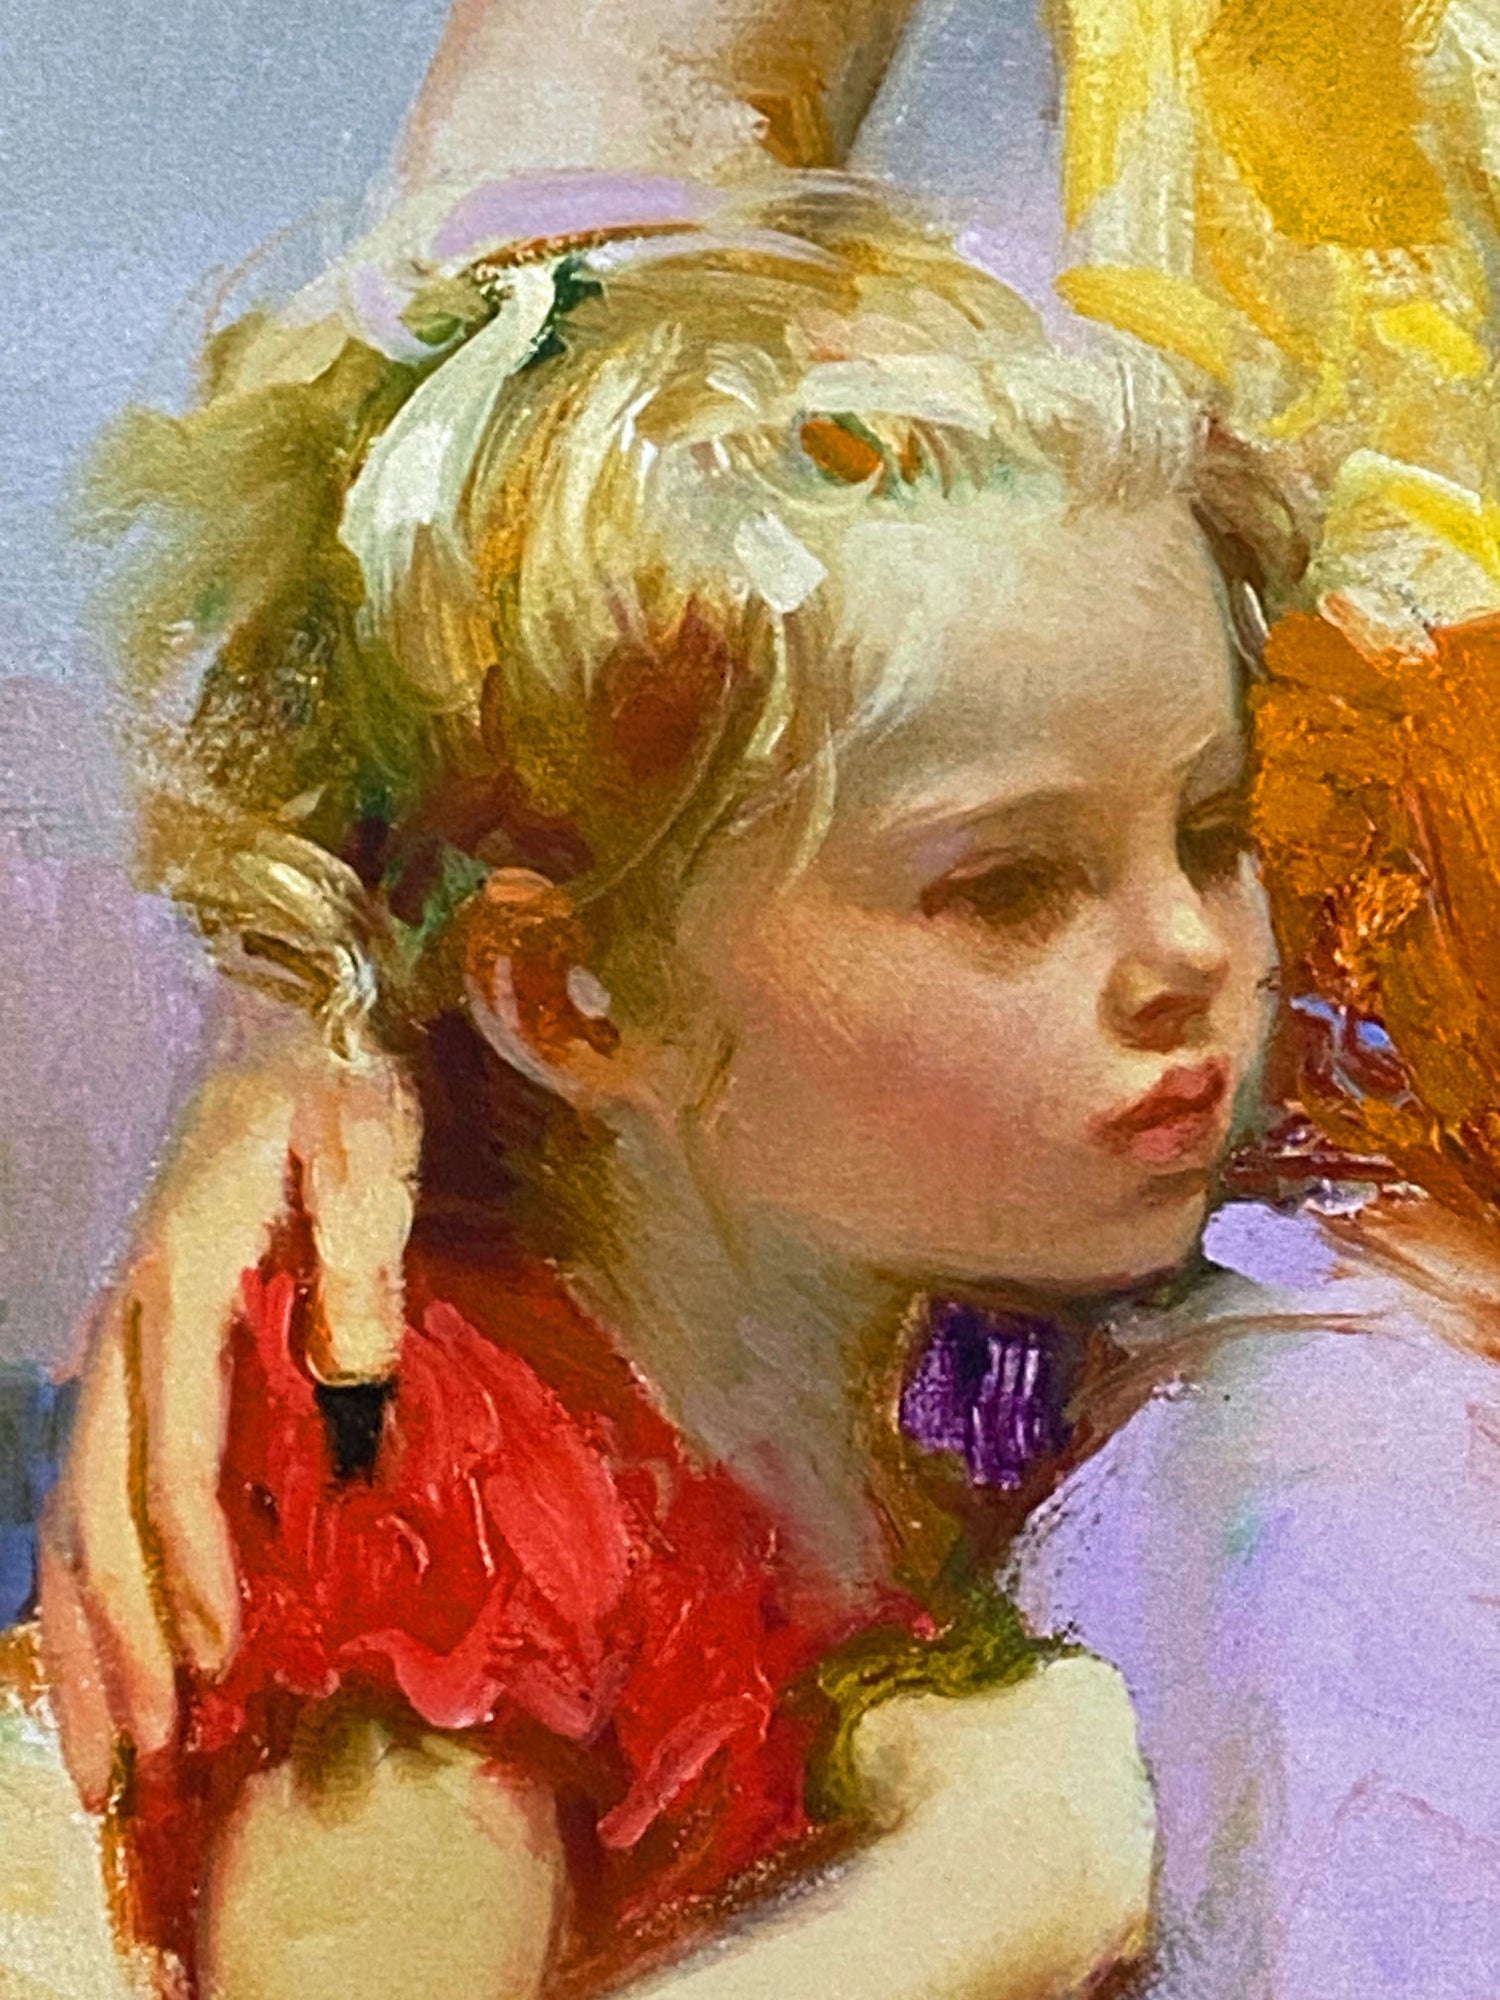 Family Retreat Pino Daeni Giclée Print Artist Hand Signed and Numbered